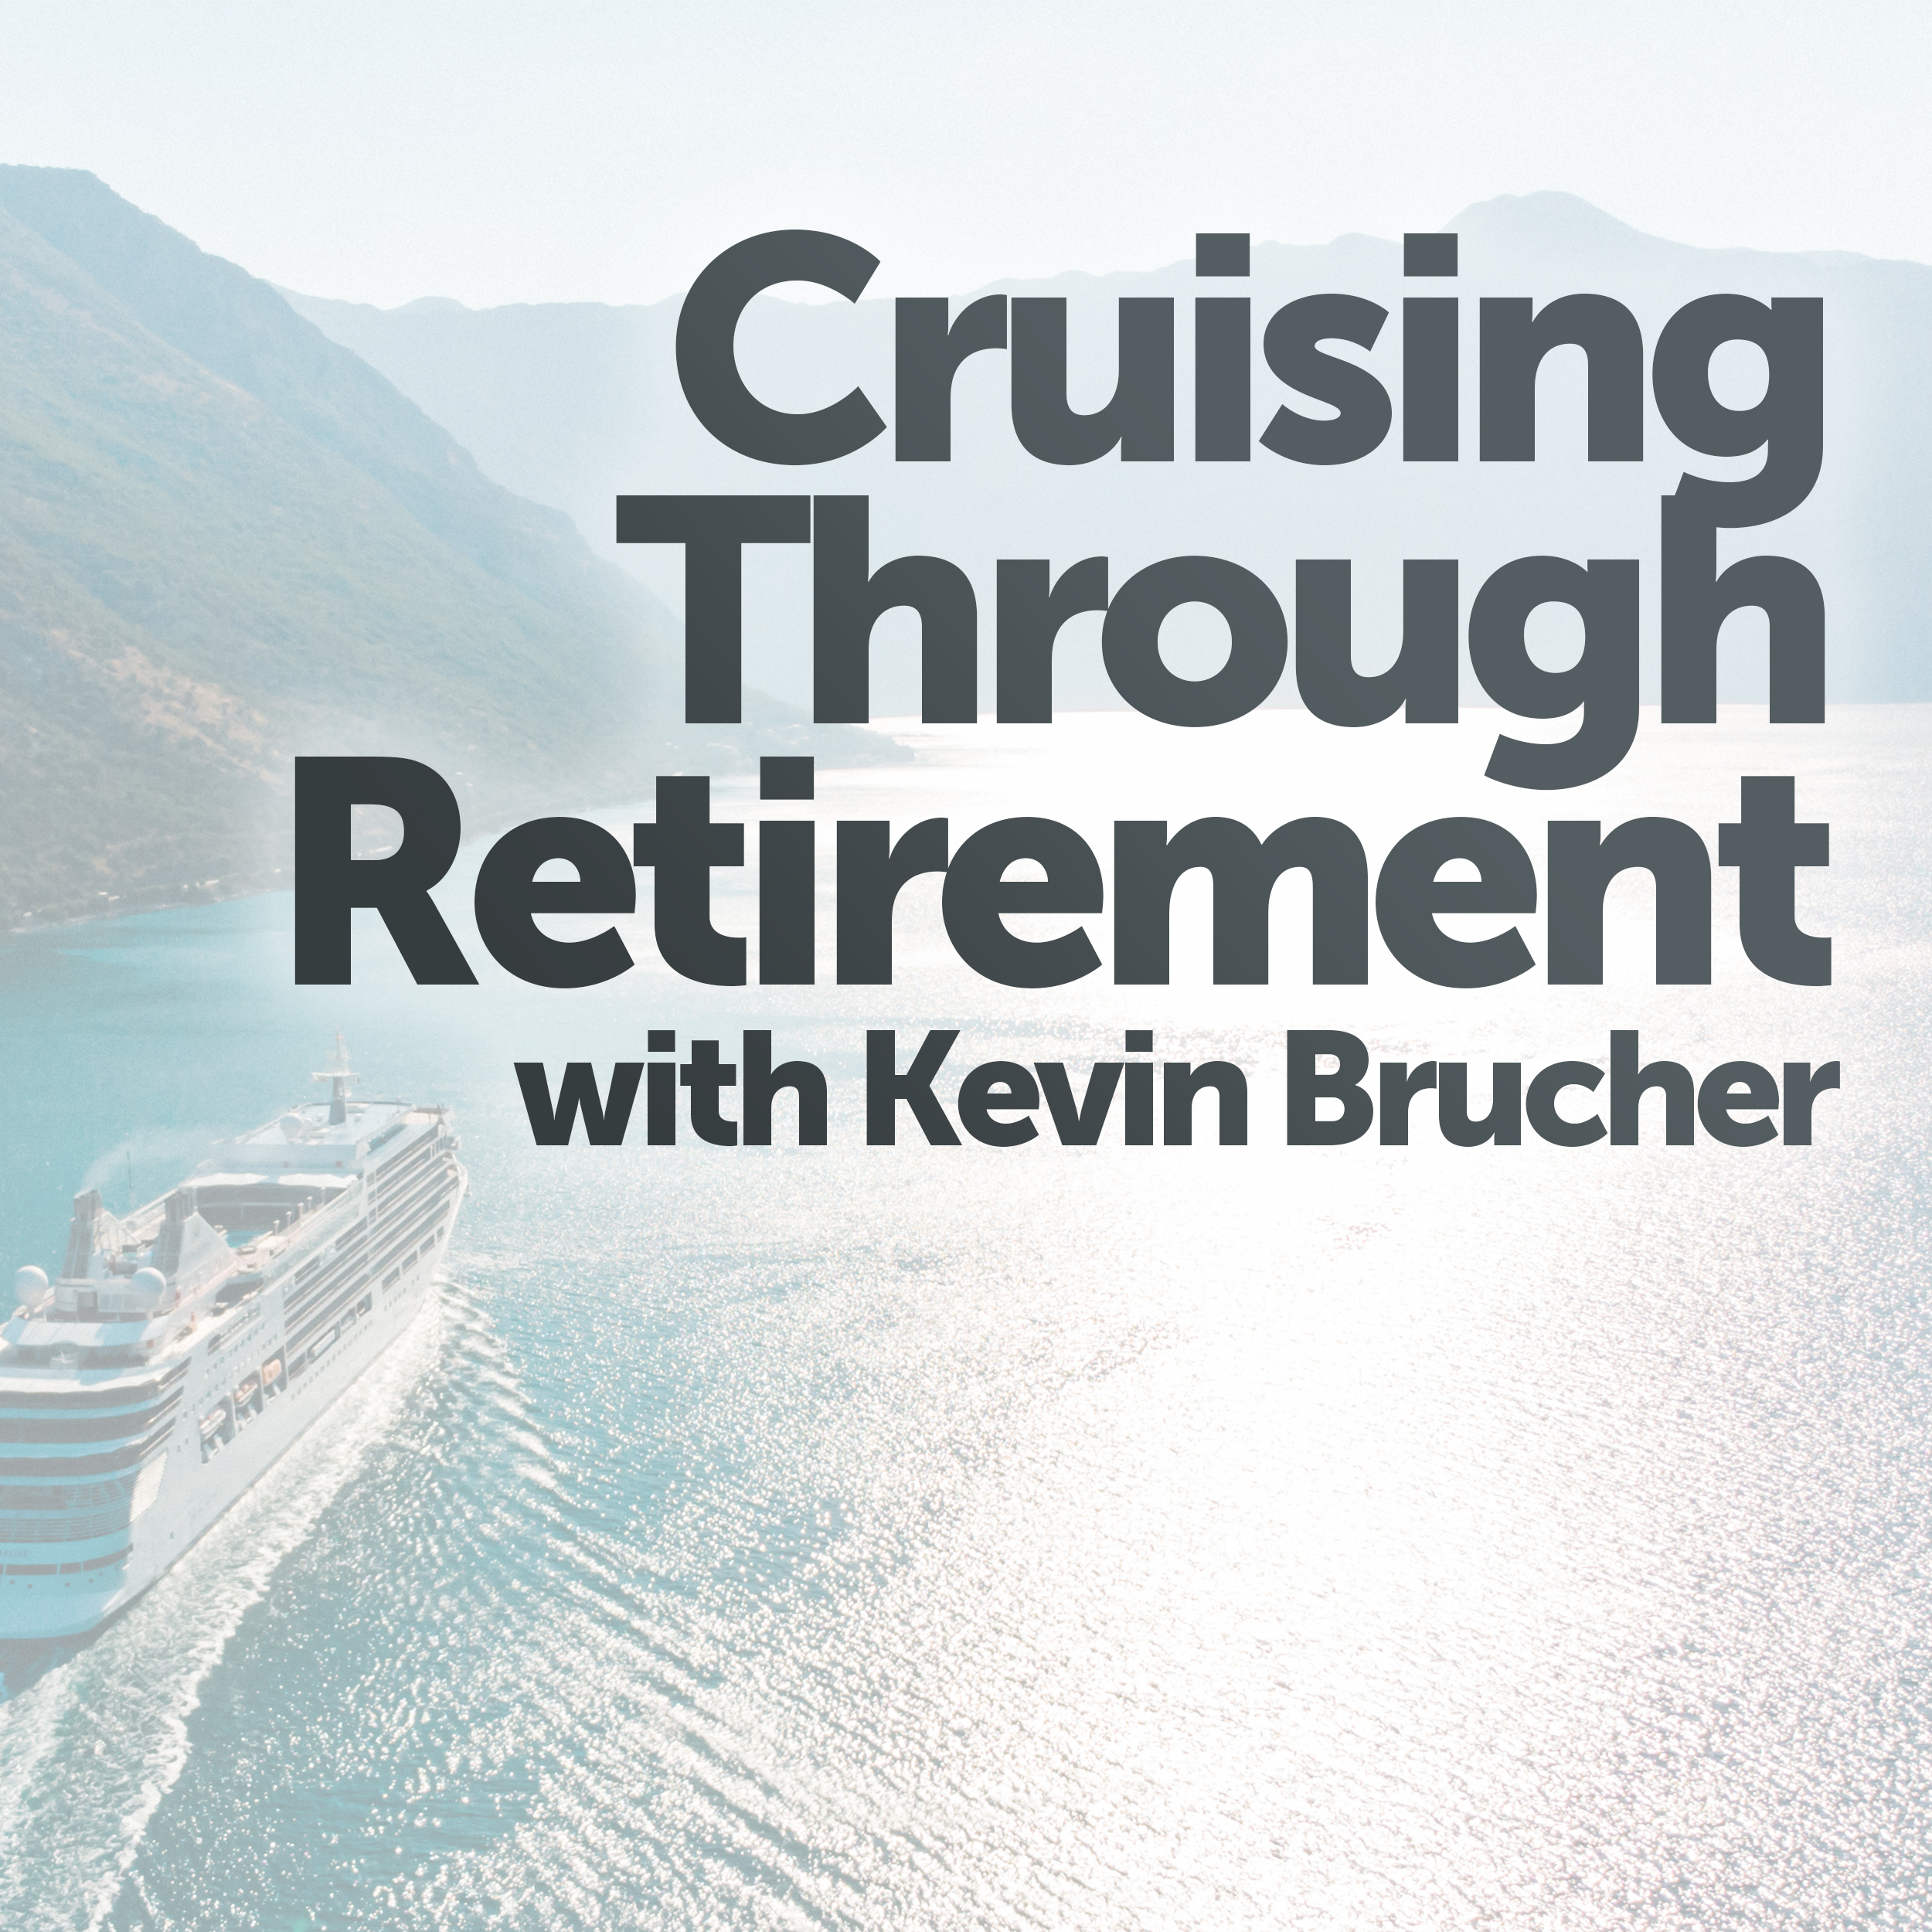 Cruising Through Retirement Kevin Brucher takes us on that path from saving to a solid spending and income plan as you enter retirement.